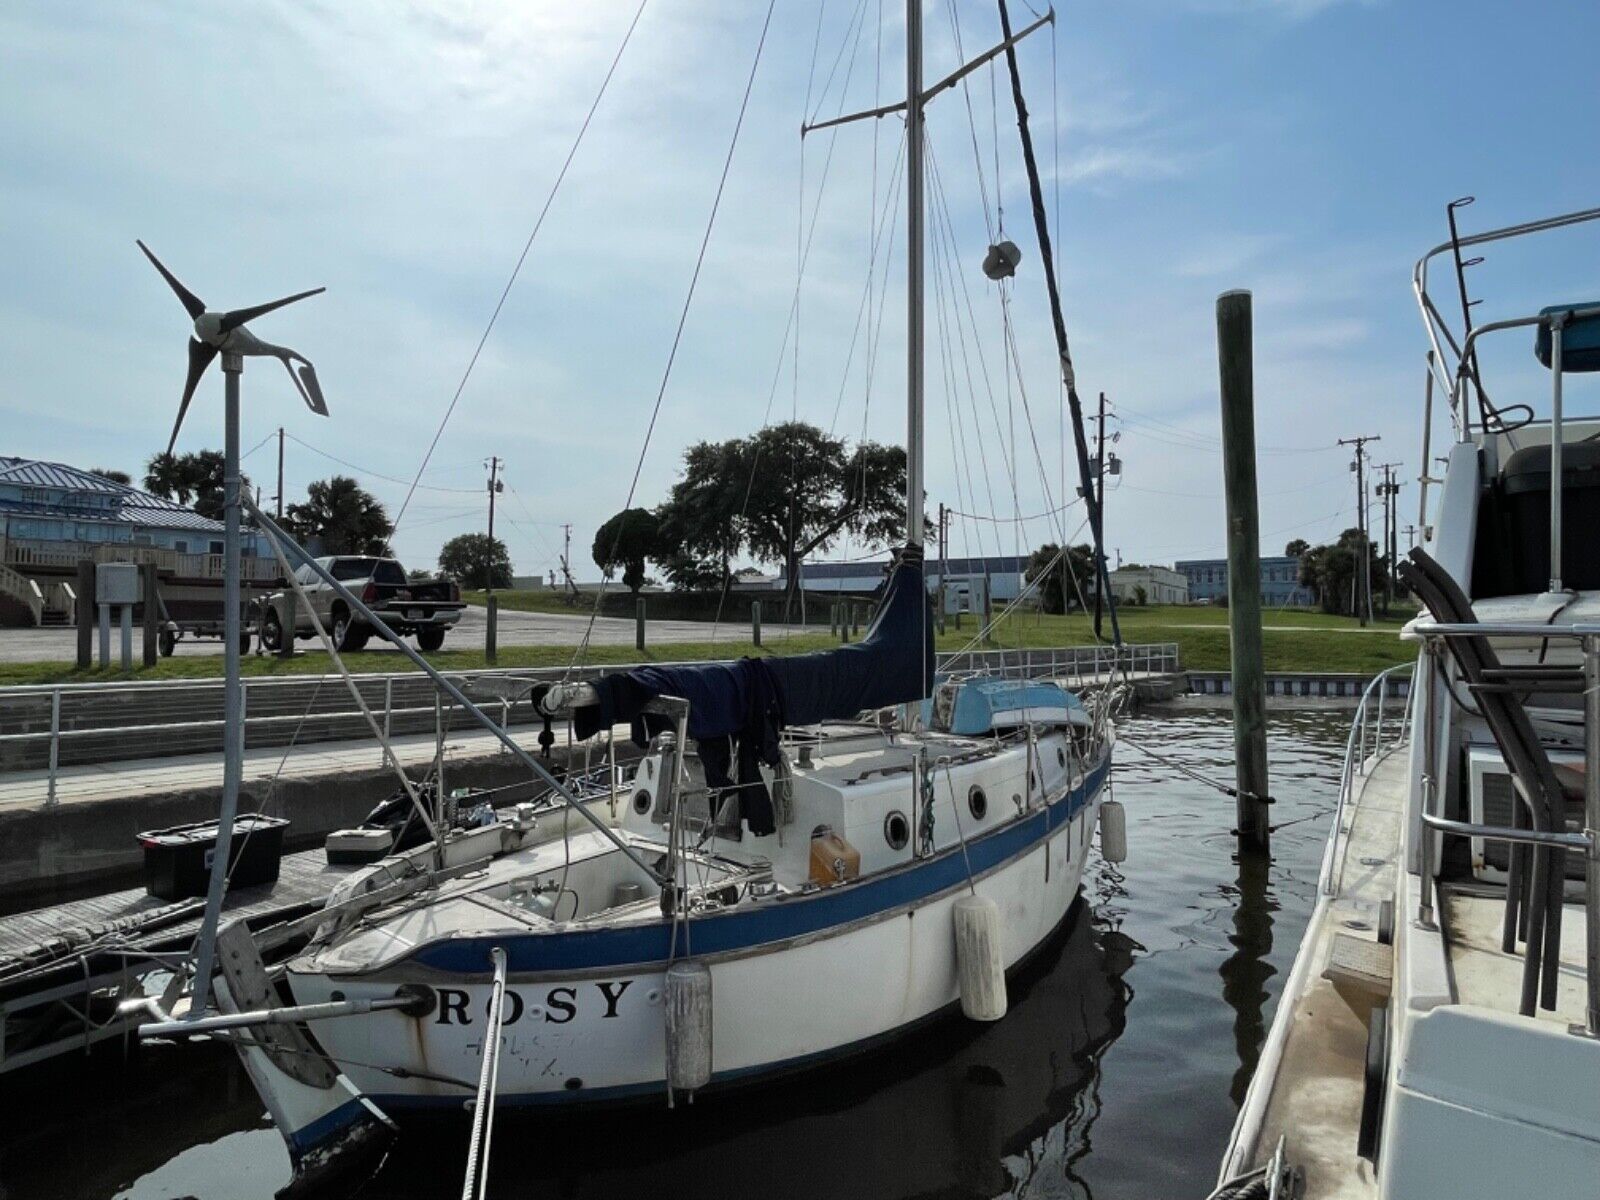 westsail 28 sailboat for sale